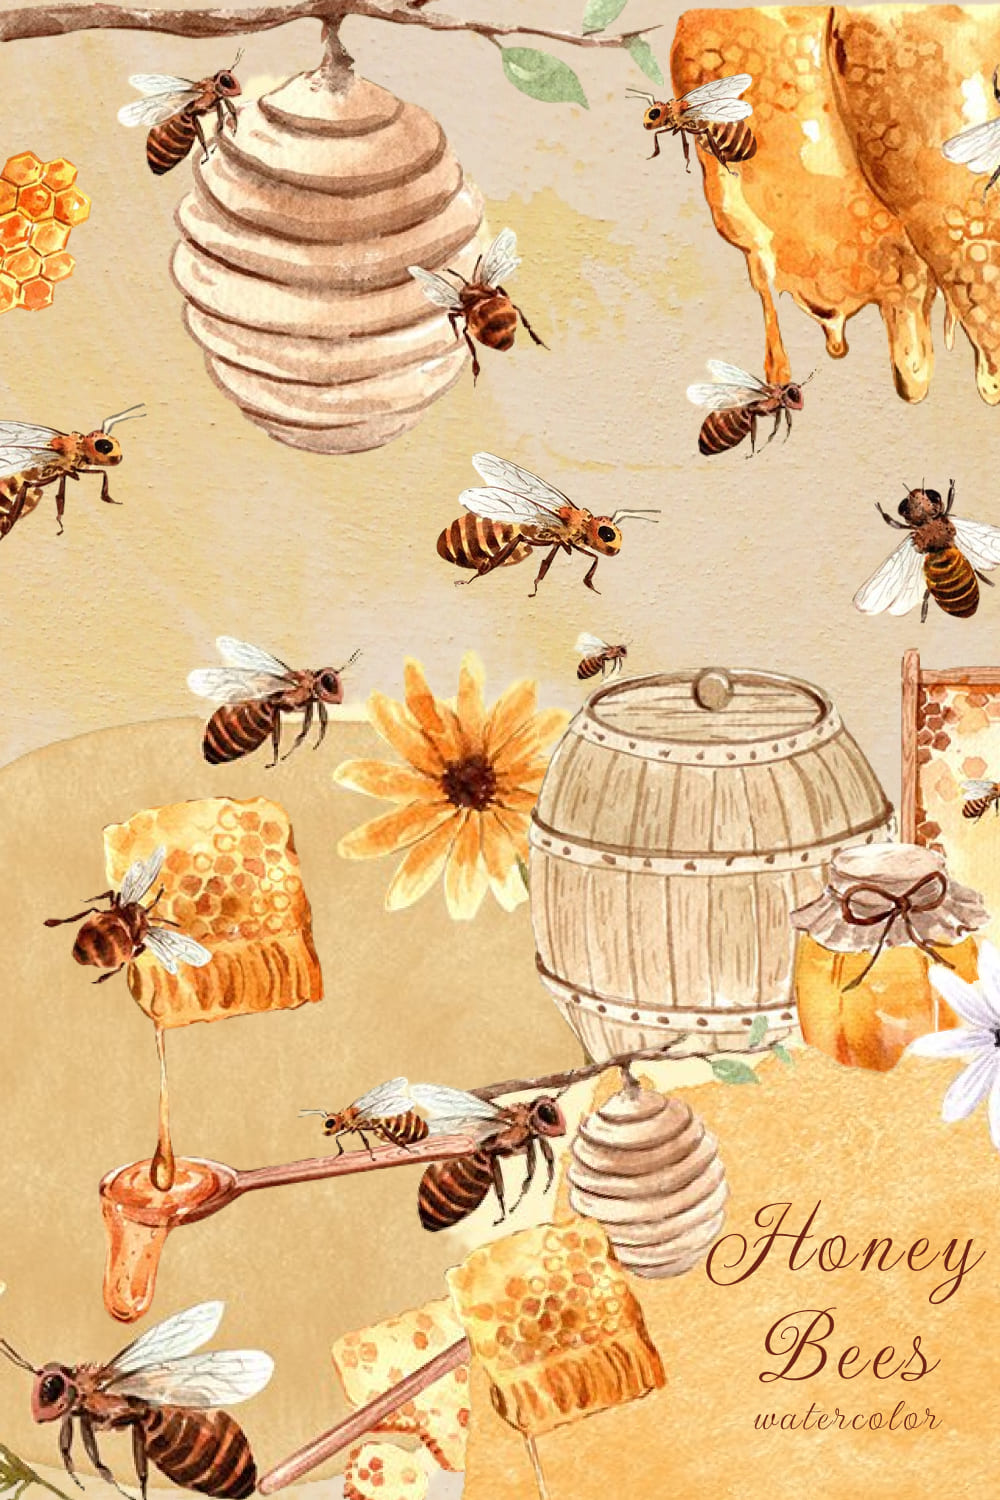 Honey Bees Watercolor - Pinterest Image Preview.